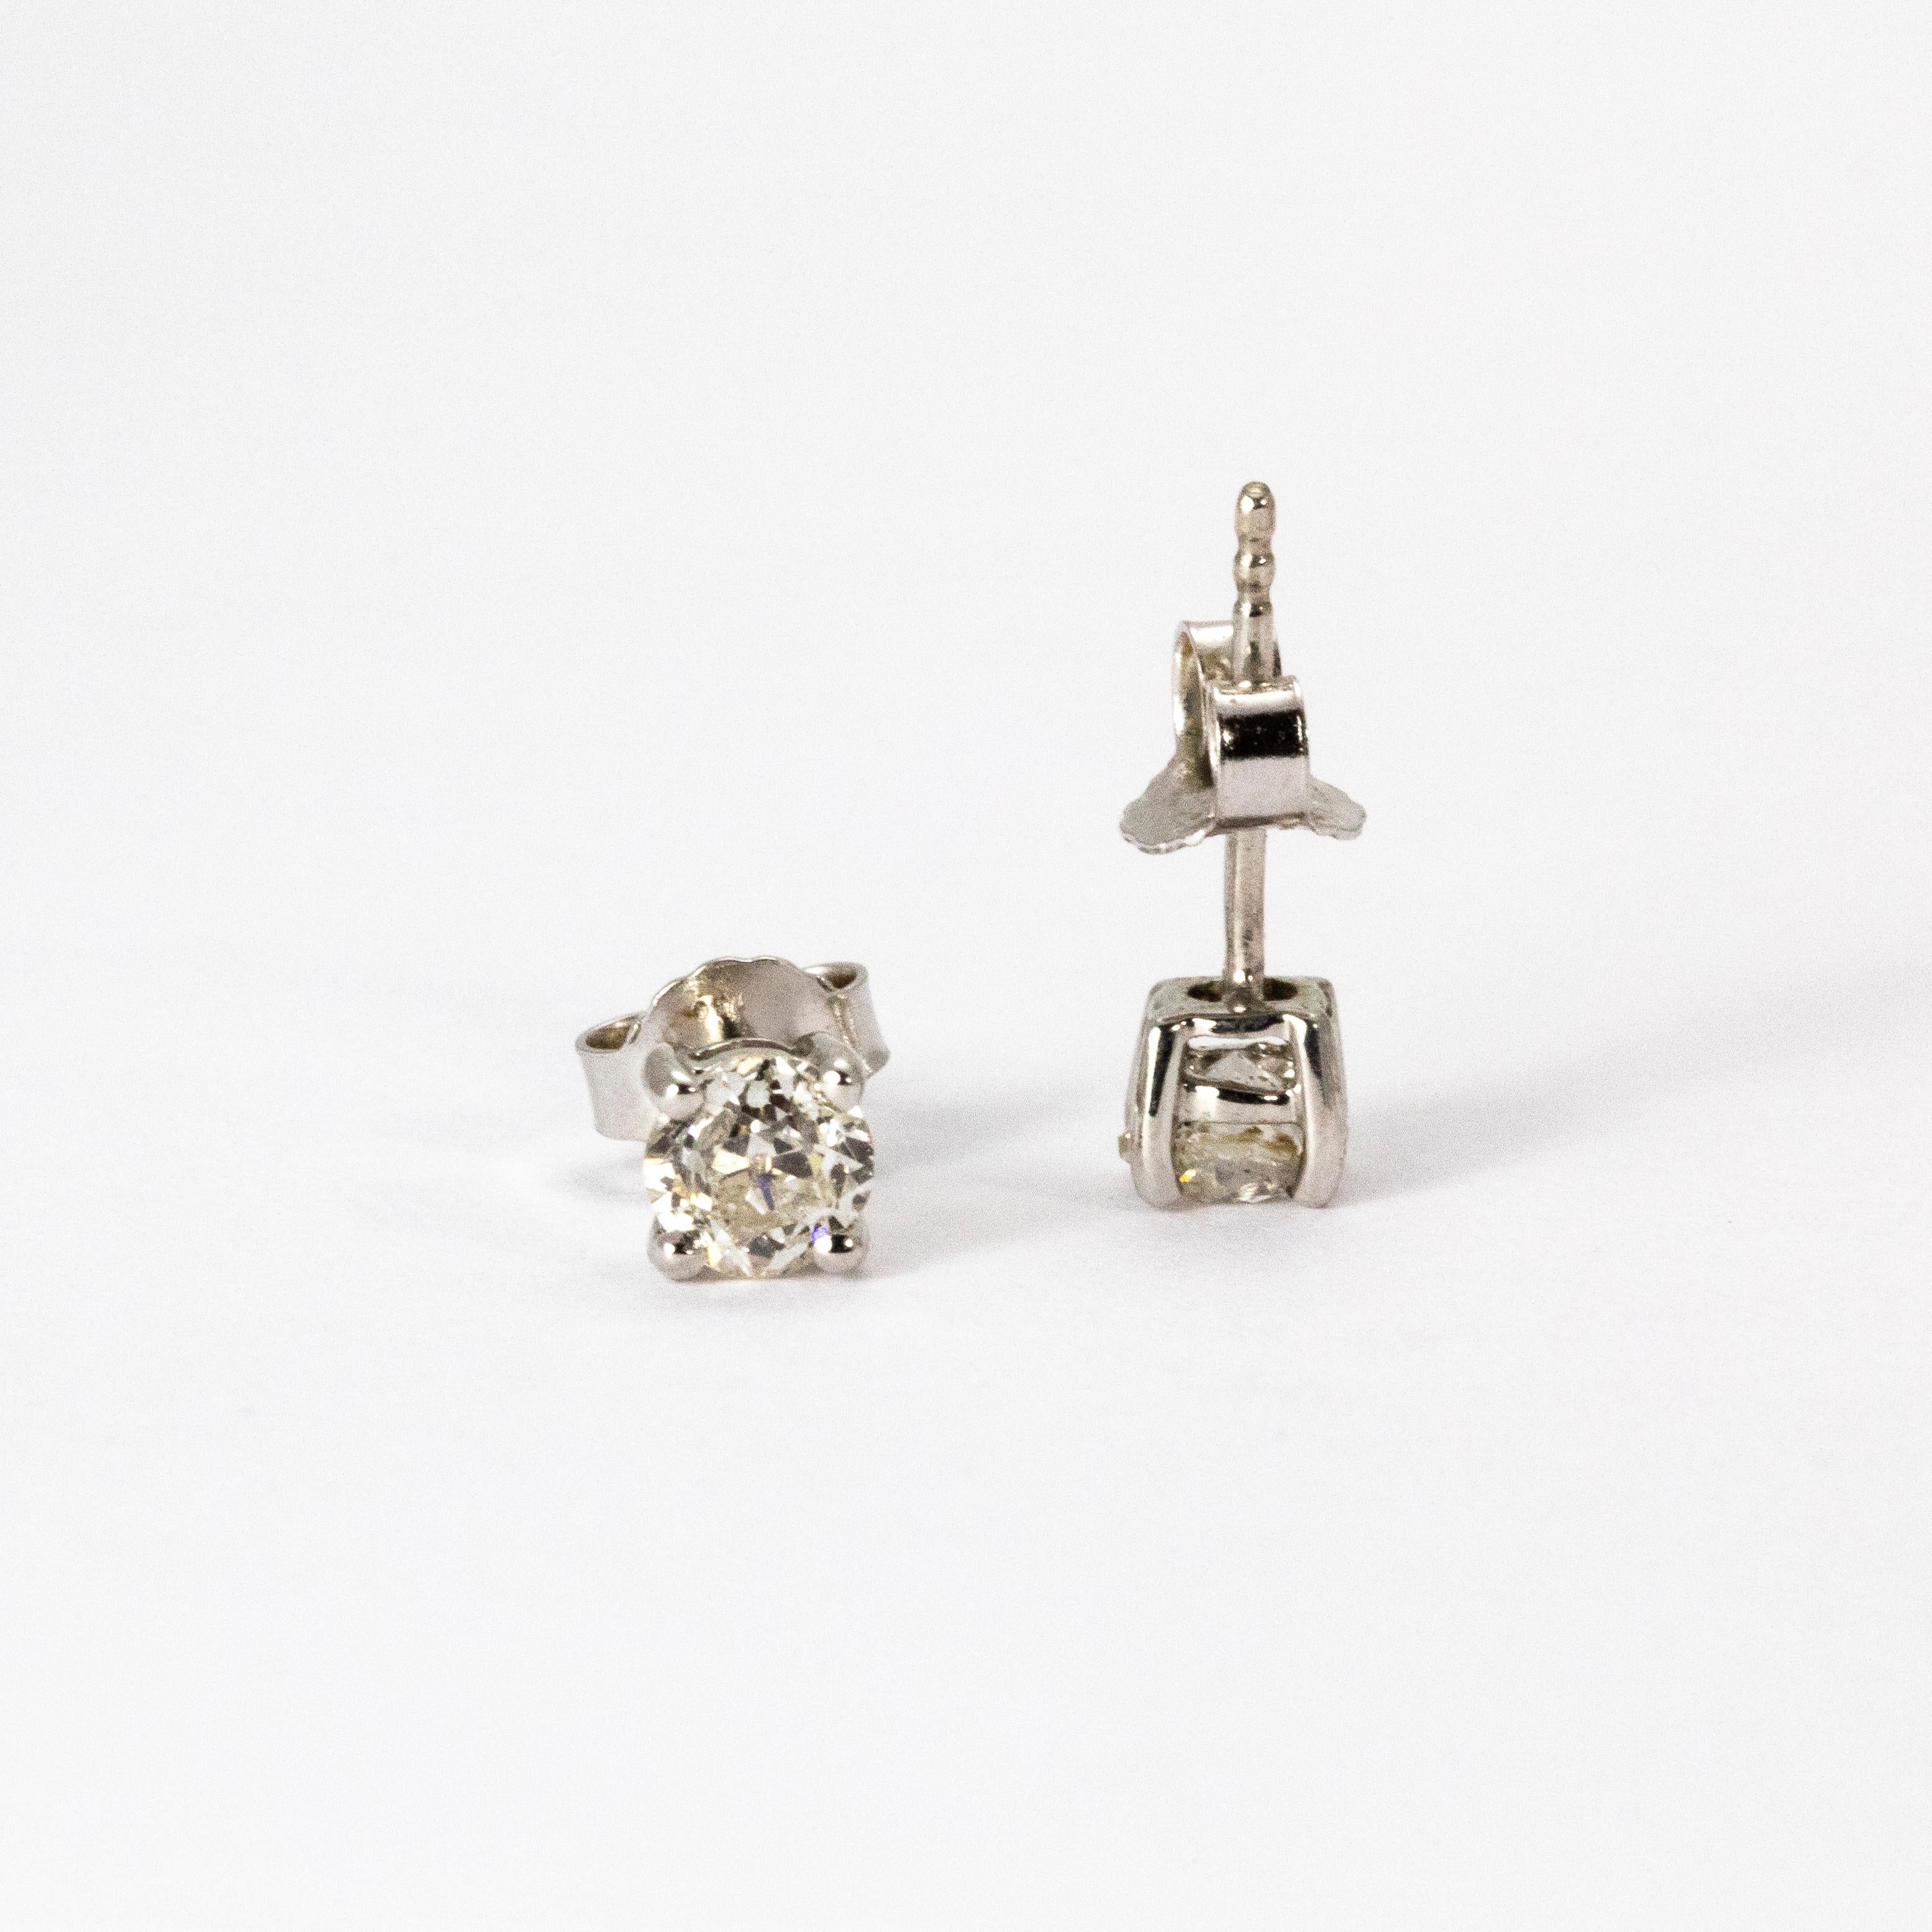 A pretty pair of Art Deco diamond stud earrings. Each earring hosts a brilliant white old European 35 point diamond, I colour and clarity SI2, in a classic four-claw setting. Modelled in 18 karat white gold.